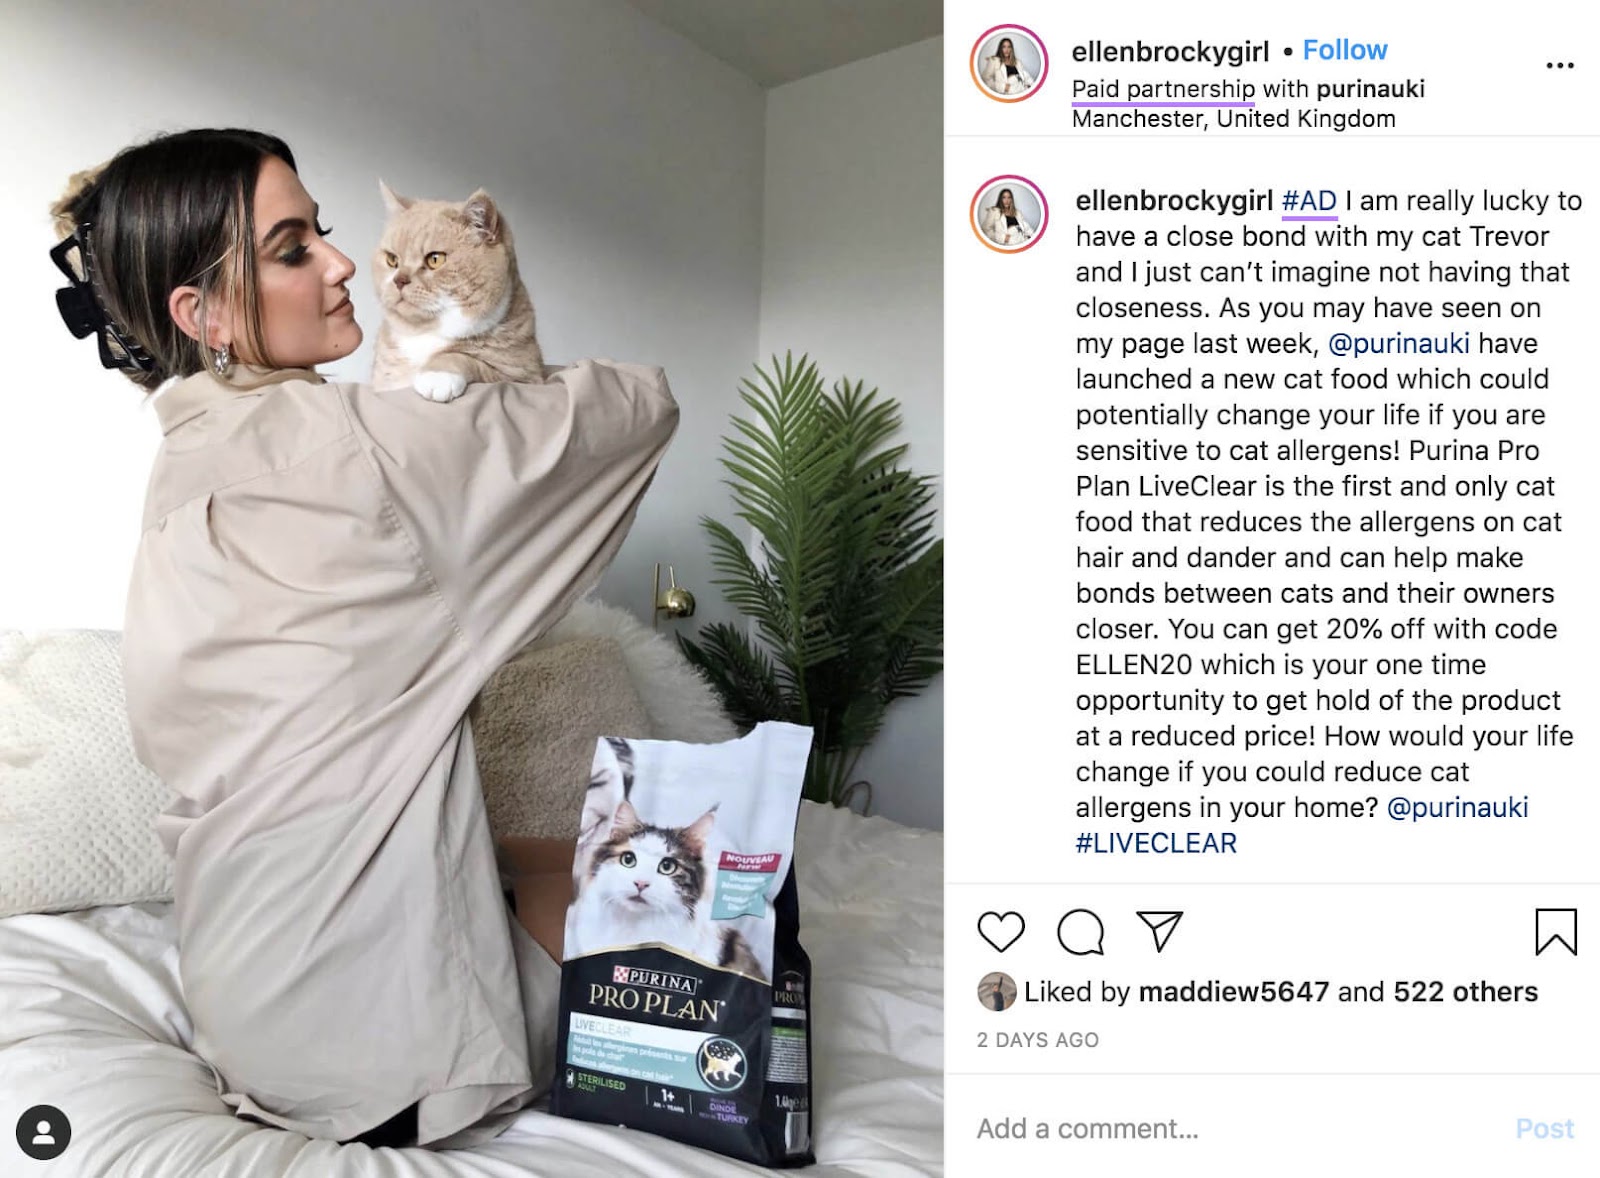 A paid post by an influencer @ellenbrockygirl on Instagram, promoting Purina's cat food